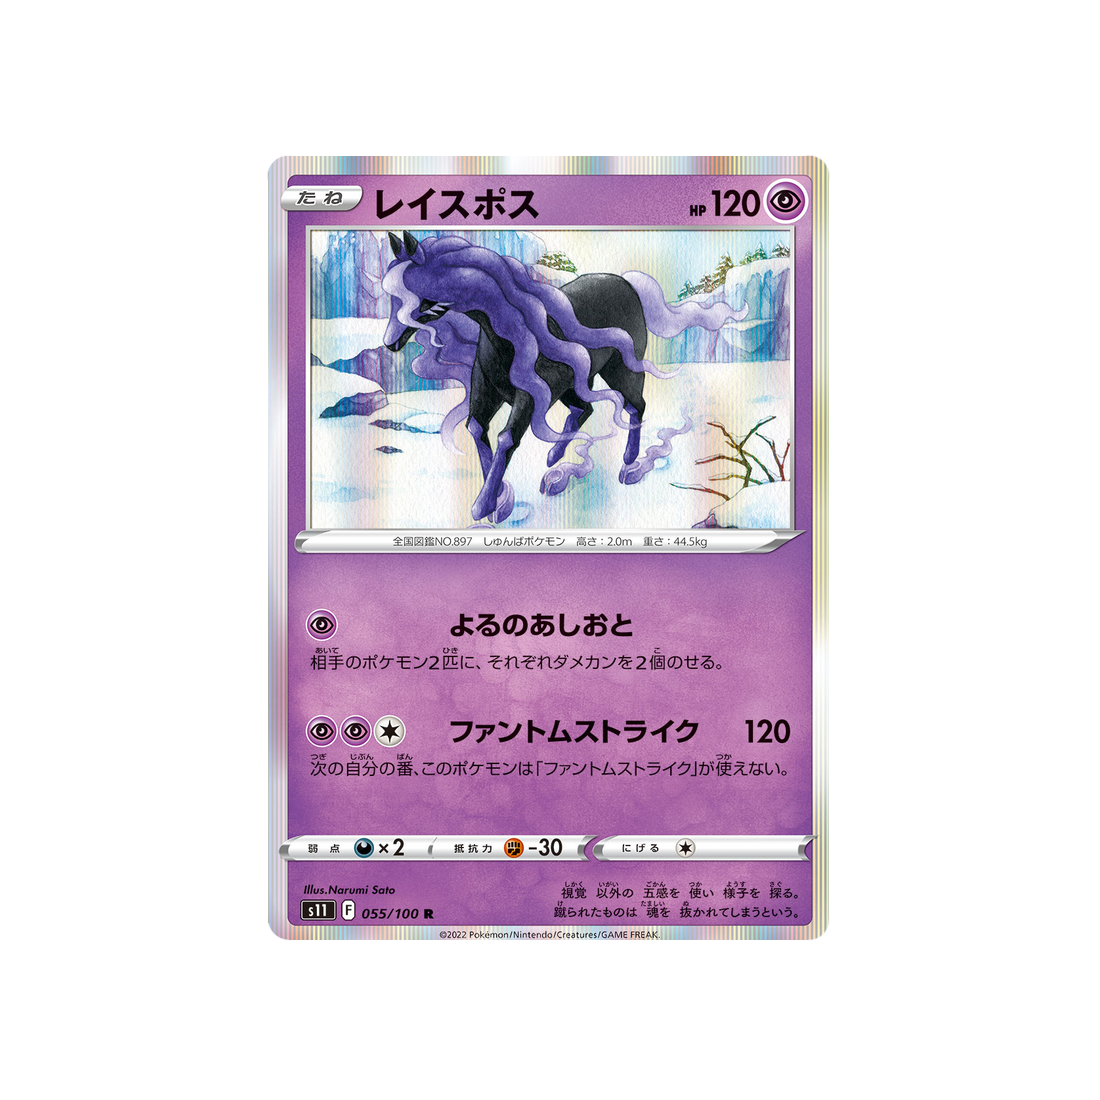 spectreval-carte-pokemon-lost-abyss-s11-055